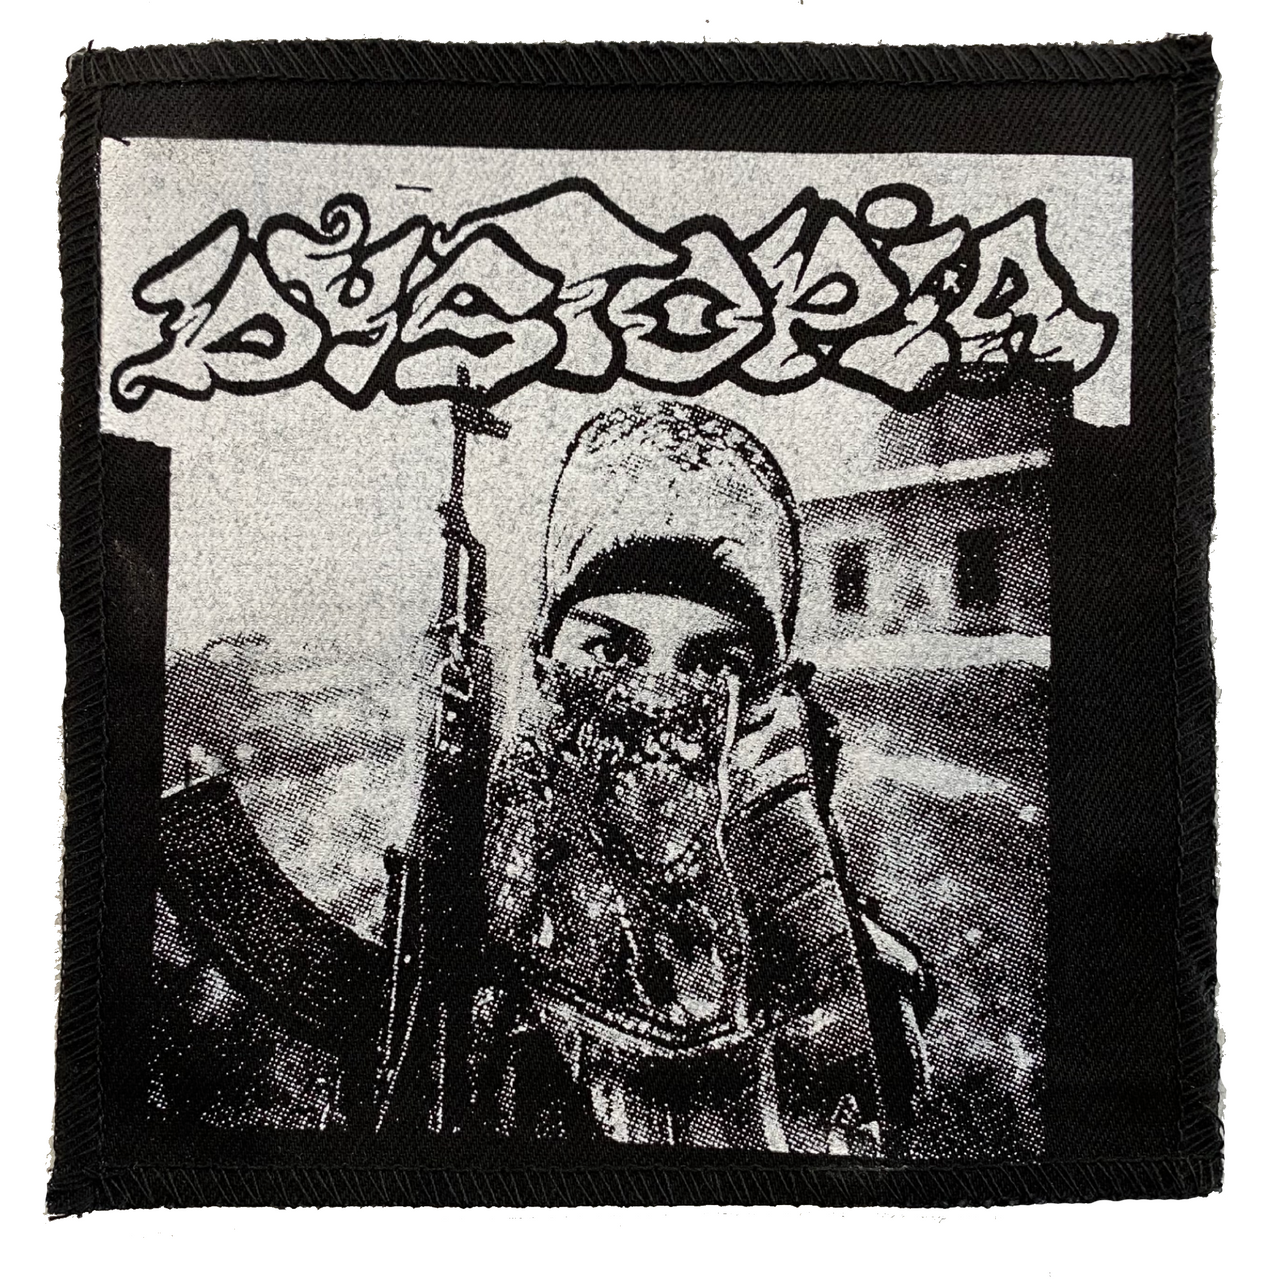 Dystopia Black Aftermath Cloth Patch